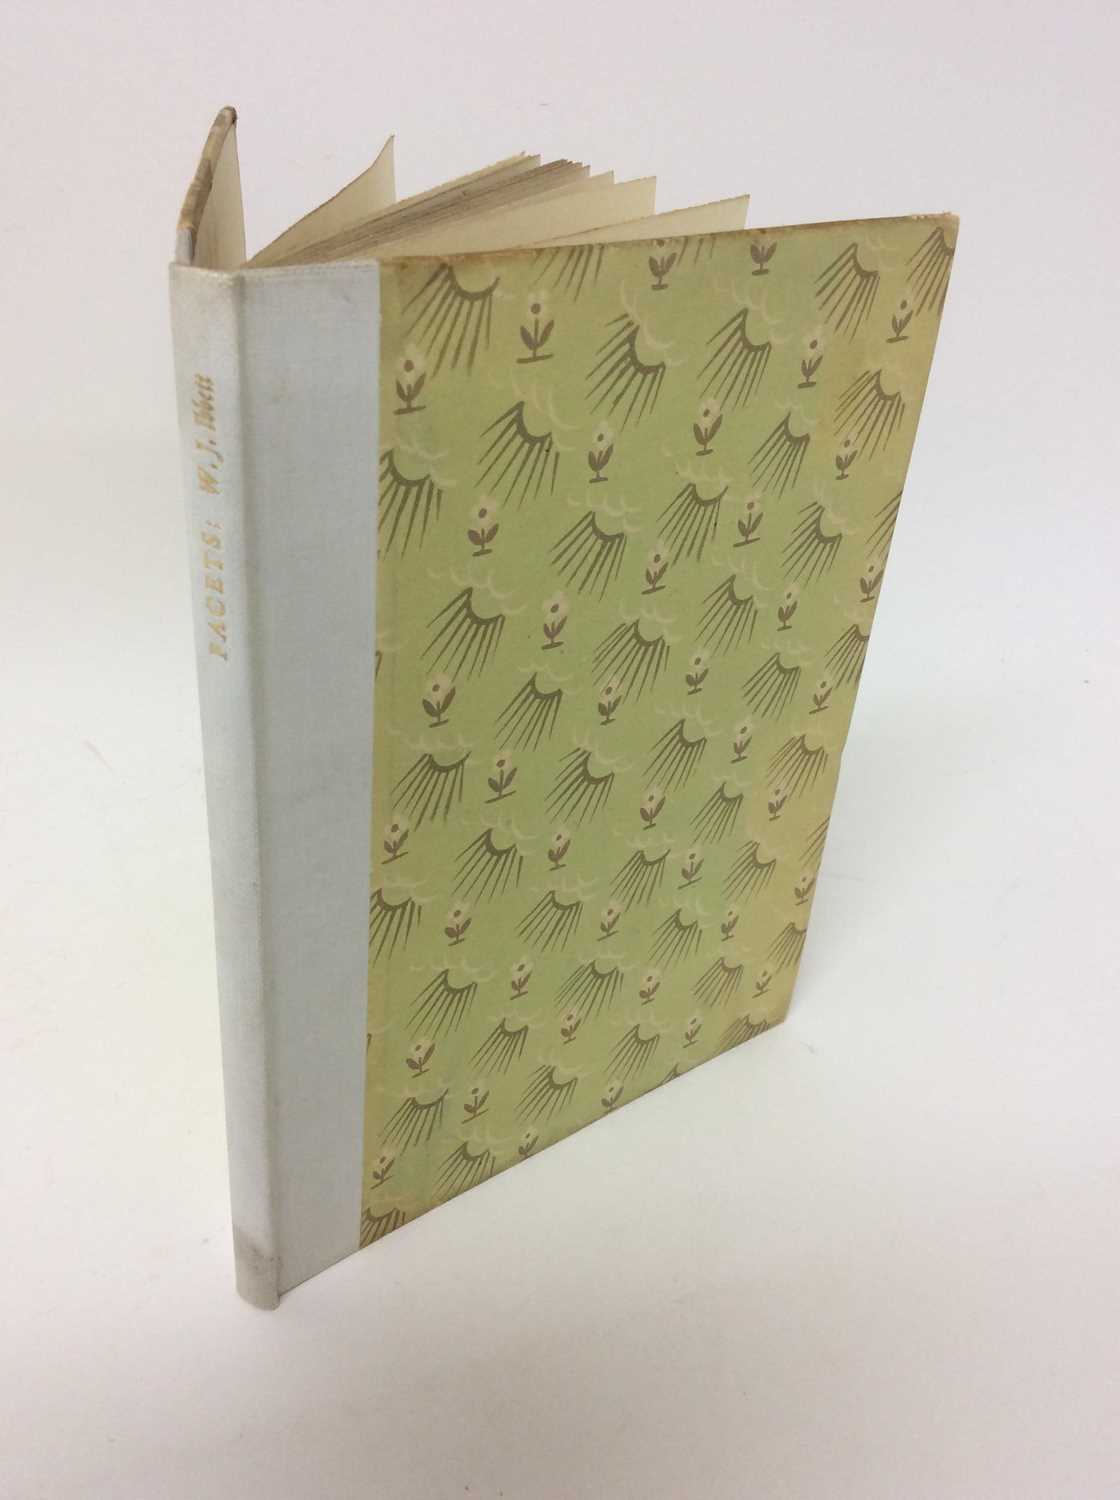 Lot 89 - William J. Ibbett - One Hundred Facets of Winter and Spring